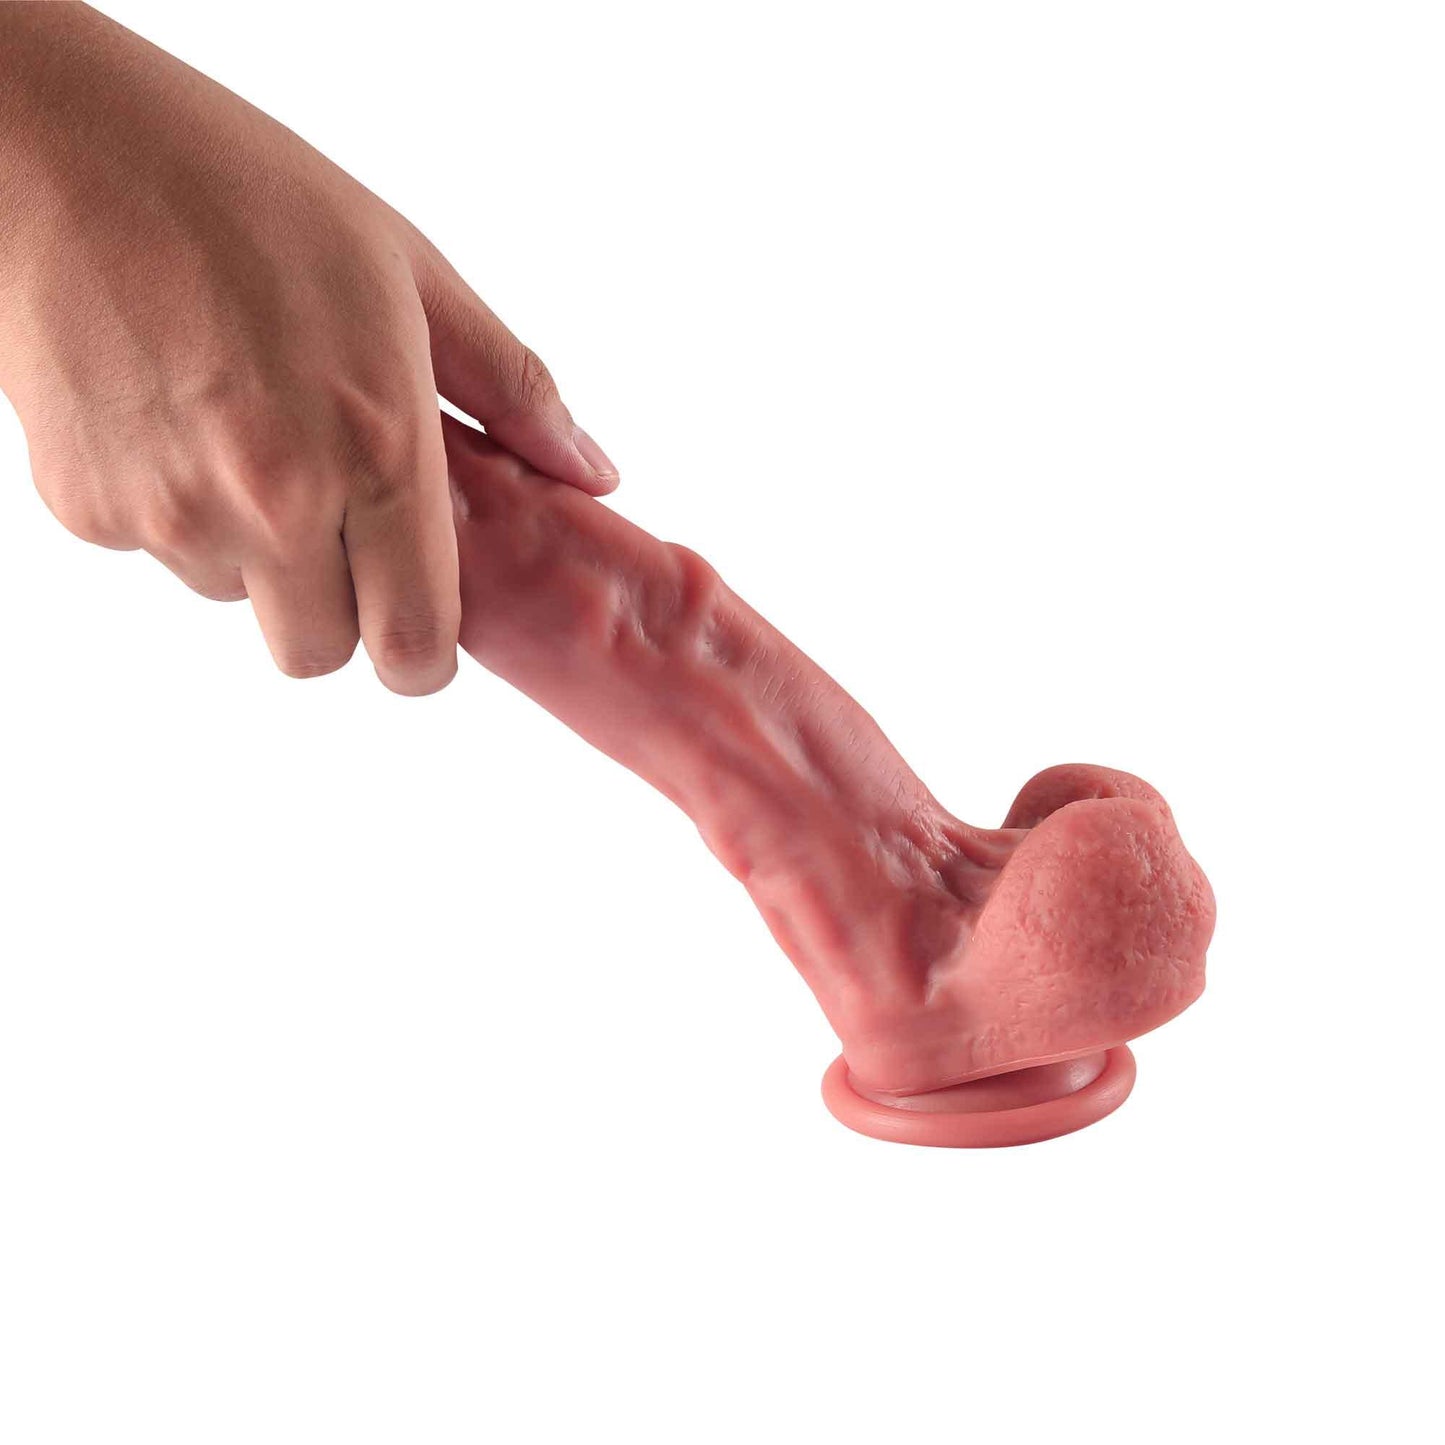 Thor - Realistic Silicone Suction Cup Bendable Dildo for Sale 7 Inch